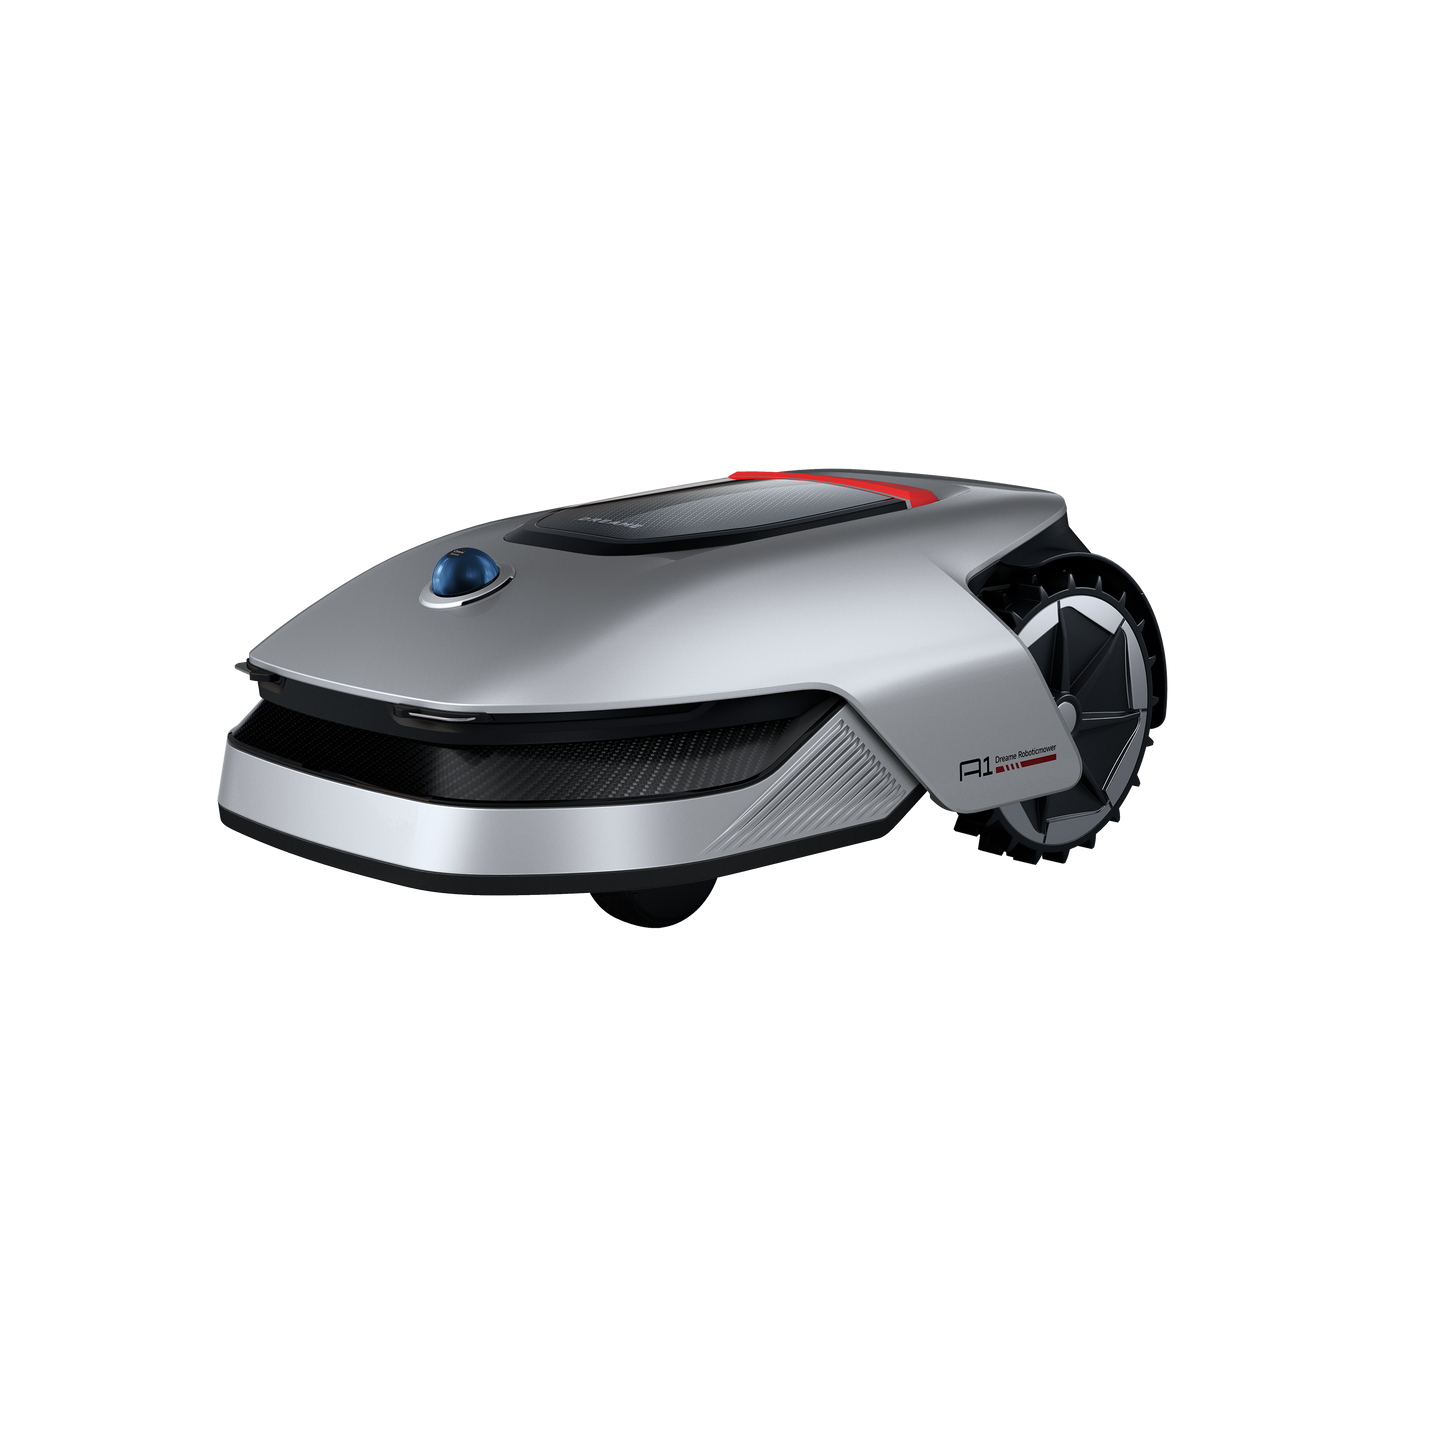 Dreame Robotic Lawn Mower A1 with OmniSense 3D Ultra System